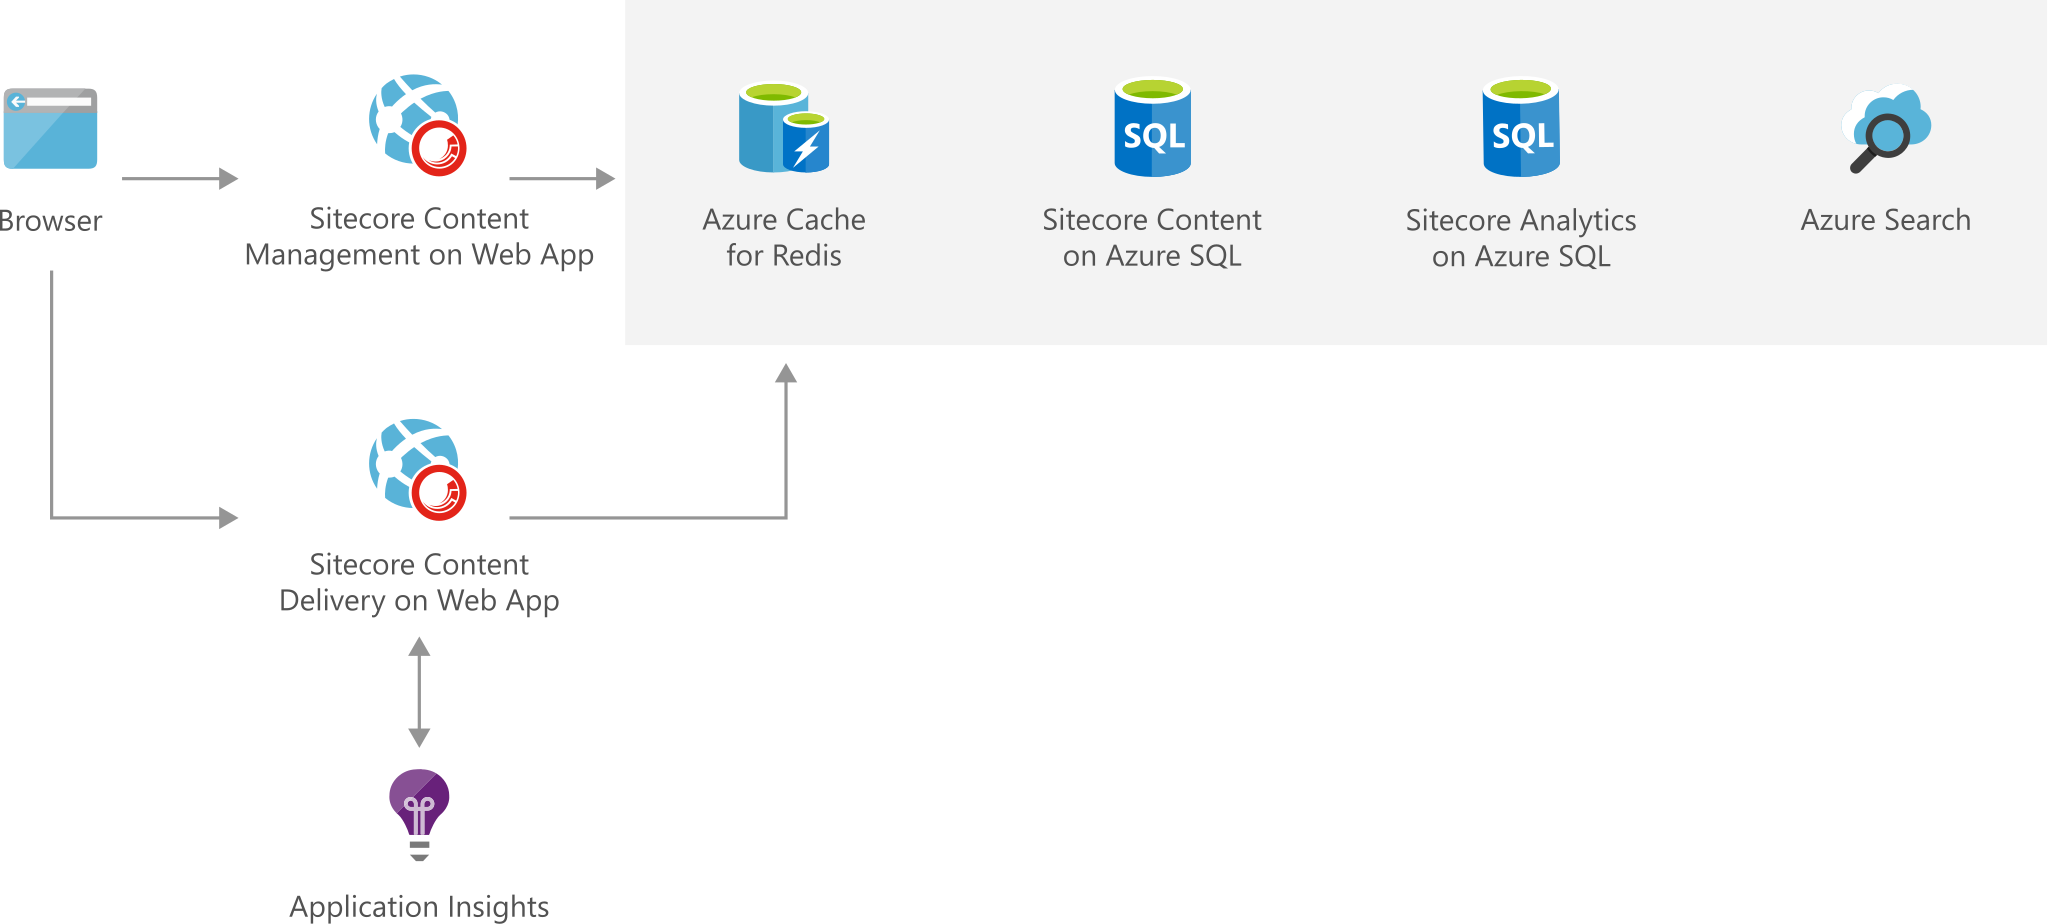 Architecture diagram show the flow from the browser through Sitecore to Azure.